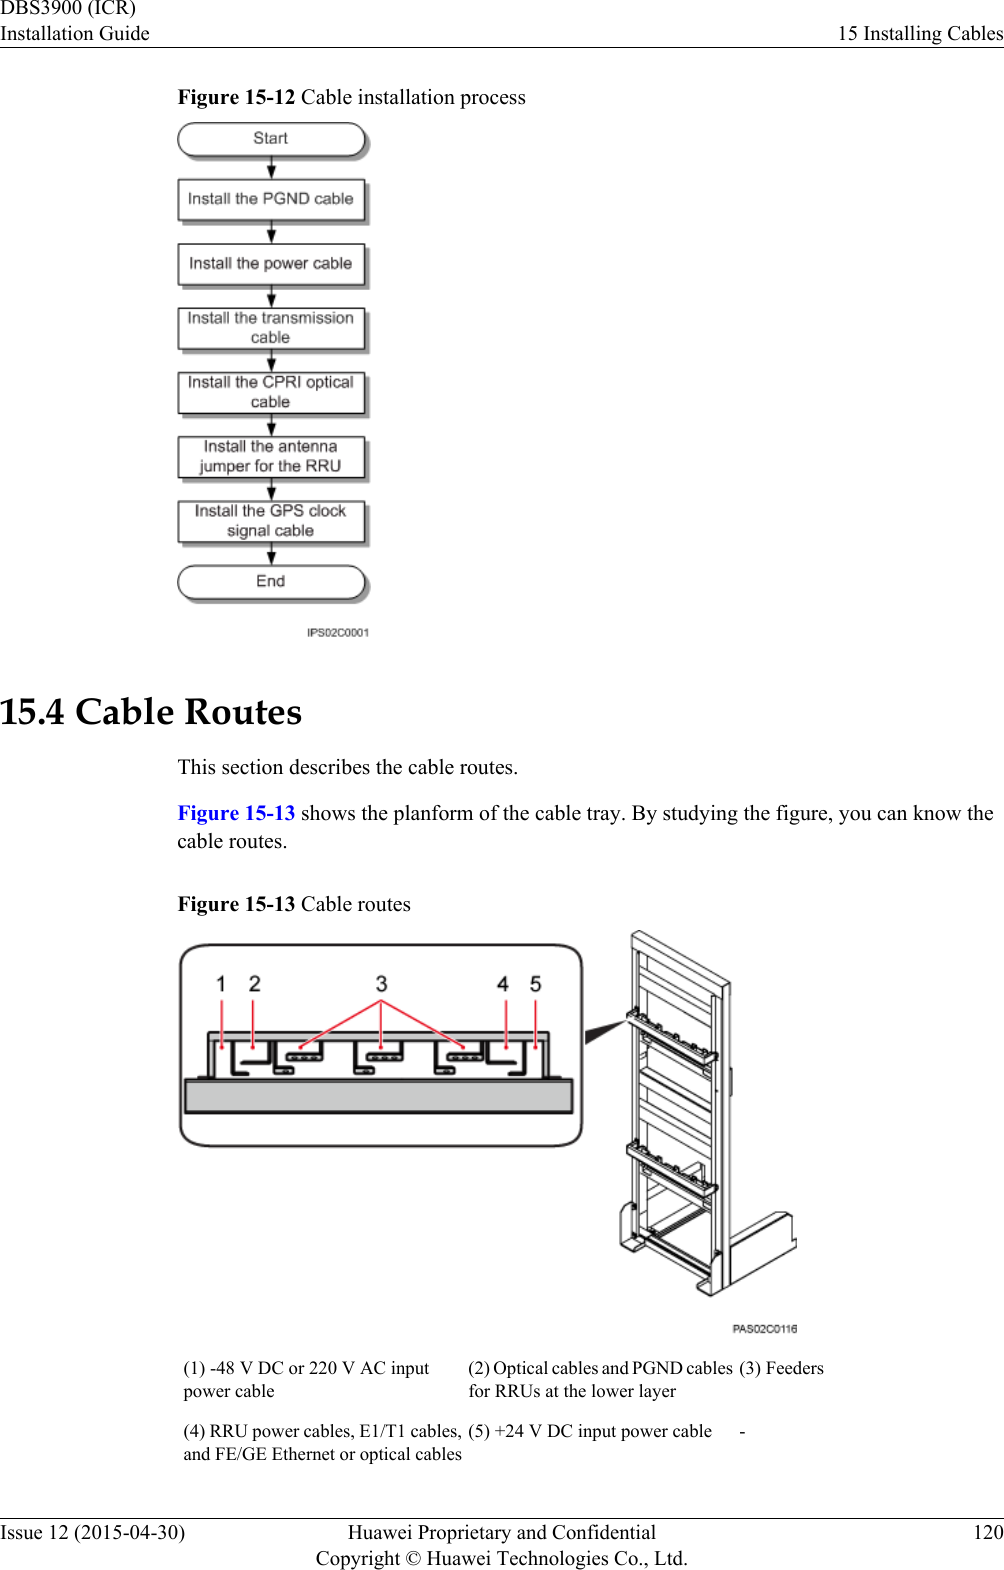 Figure 15-12 Cable installation process15.4 Cable RoutesThis section describes the cable routes.Figure 15-13 shows the planform of the cable tray. By studying the figure, you can know thecable routes.Figure 15-13 Cable routes(1) -48 V DC or 220 V AC inputpower cable(2) Optical cables and PGND cablesfor RRUs at the lower layer(3) Feeders(4) RRU power cables, E1/T1 cables,and FE/GE Ethernet or optical cables(5) +24 V DC input power cable -DBS3900 (ICR)Installation Guide 15 Installing CablesIssue 12 (2015-04-30) Huawei Proprietary and ConfidentialCopyright © Huawei Technologies Co., Ltd.120